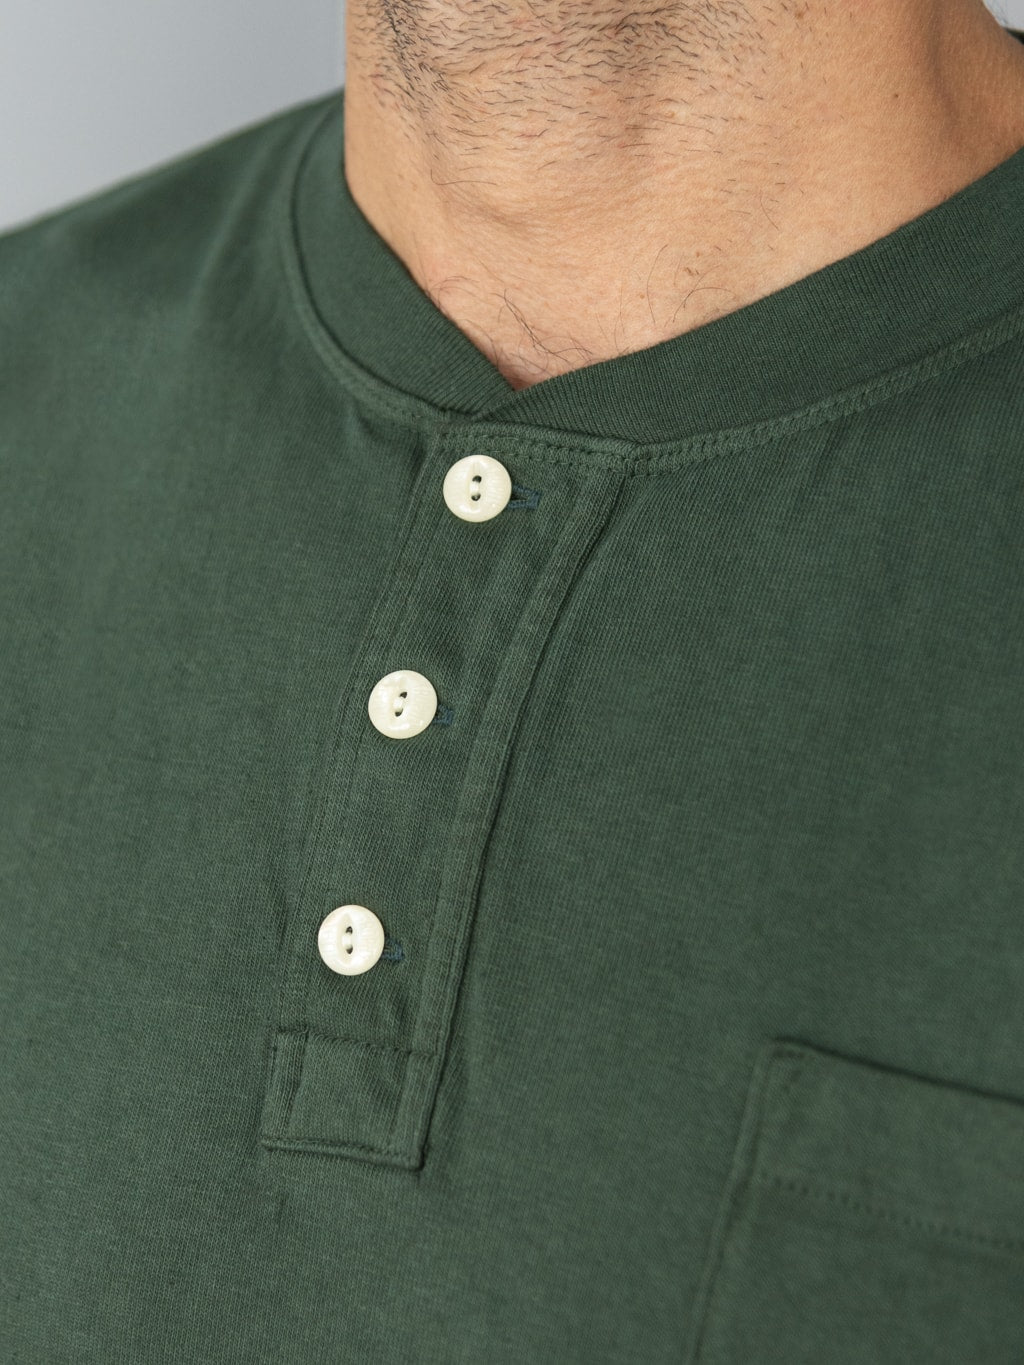 trophy clothing od henley tee olive buttons